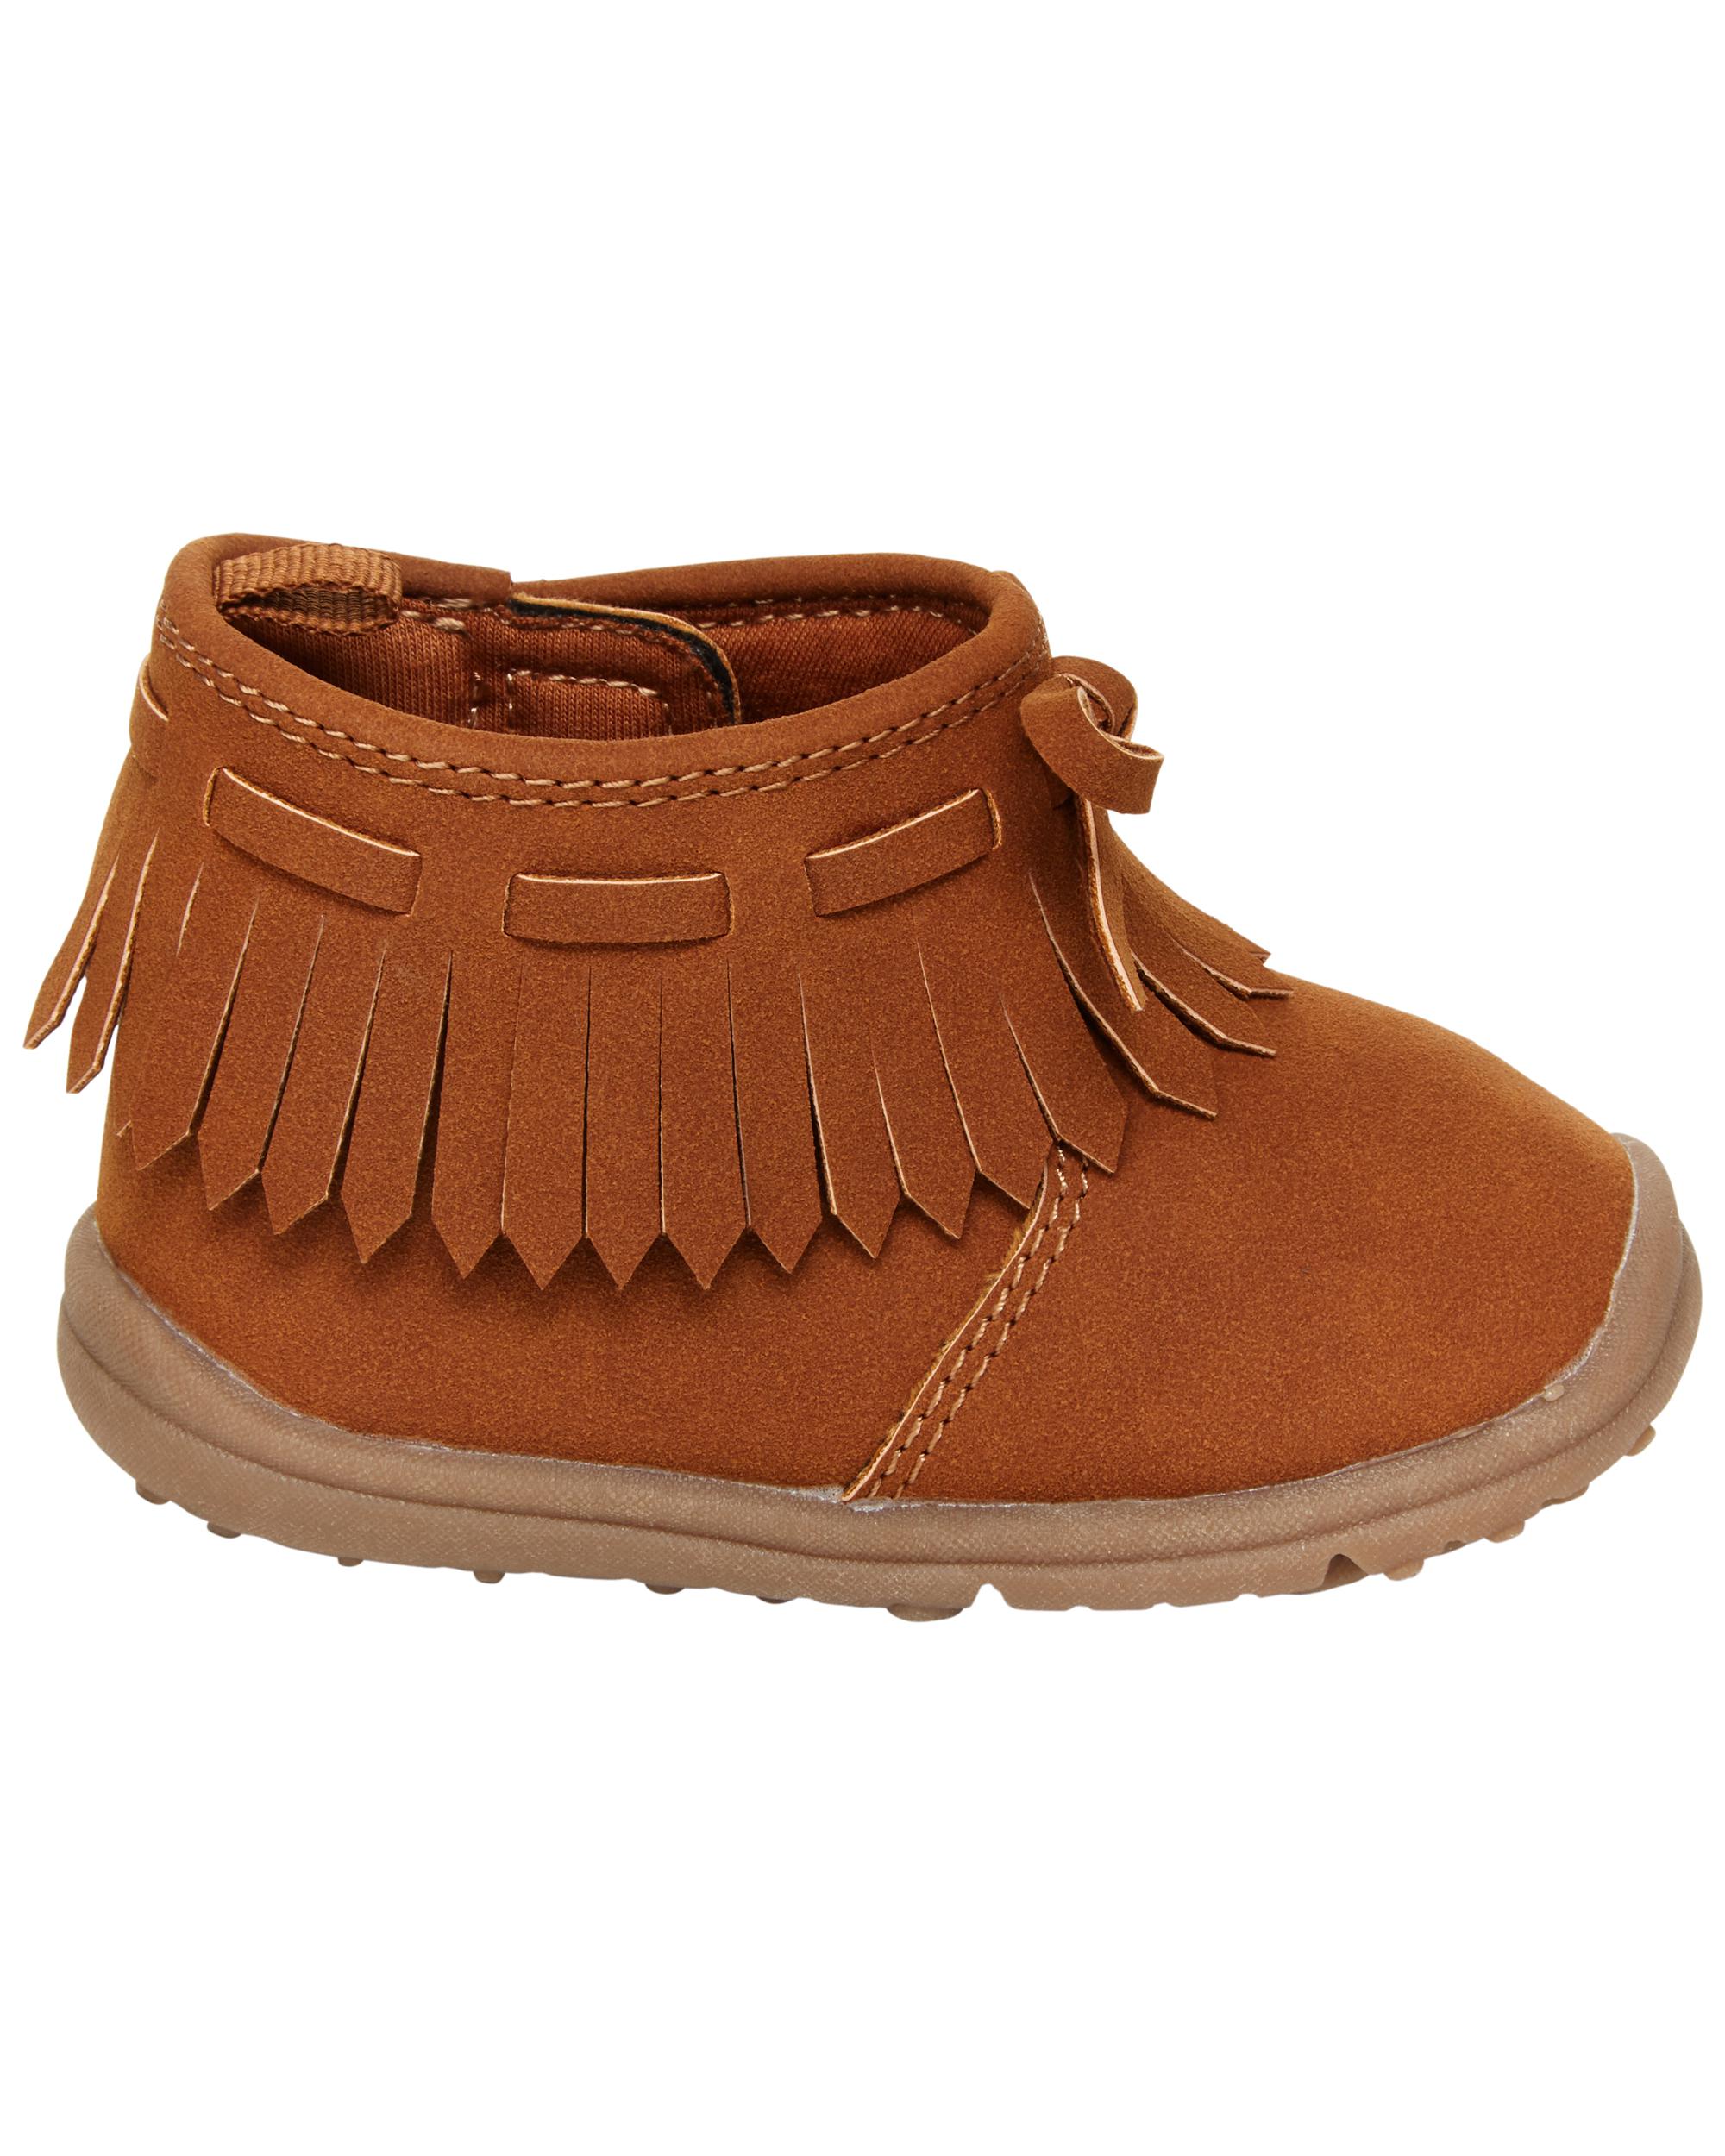 Every Step Fringe Boot